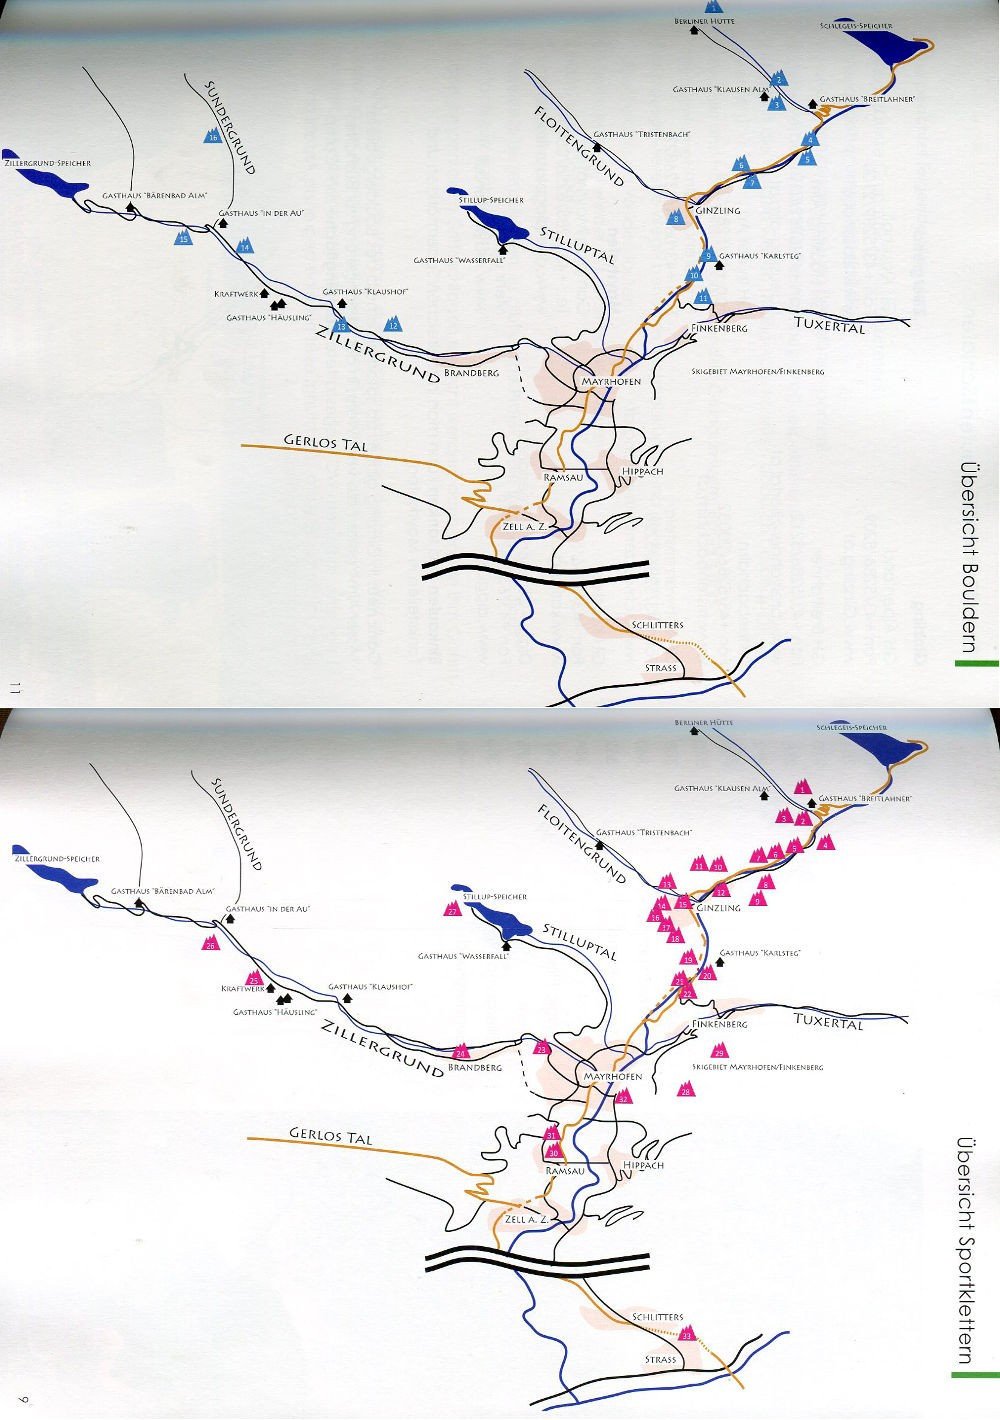 Zillertal: Sport Climbing &amp; Bouldering guide, example inside pages showing maps